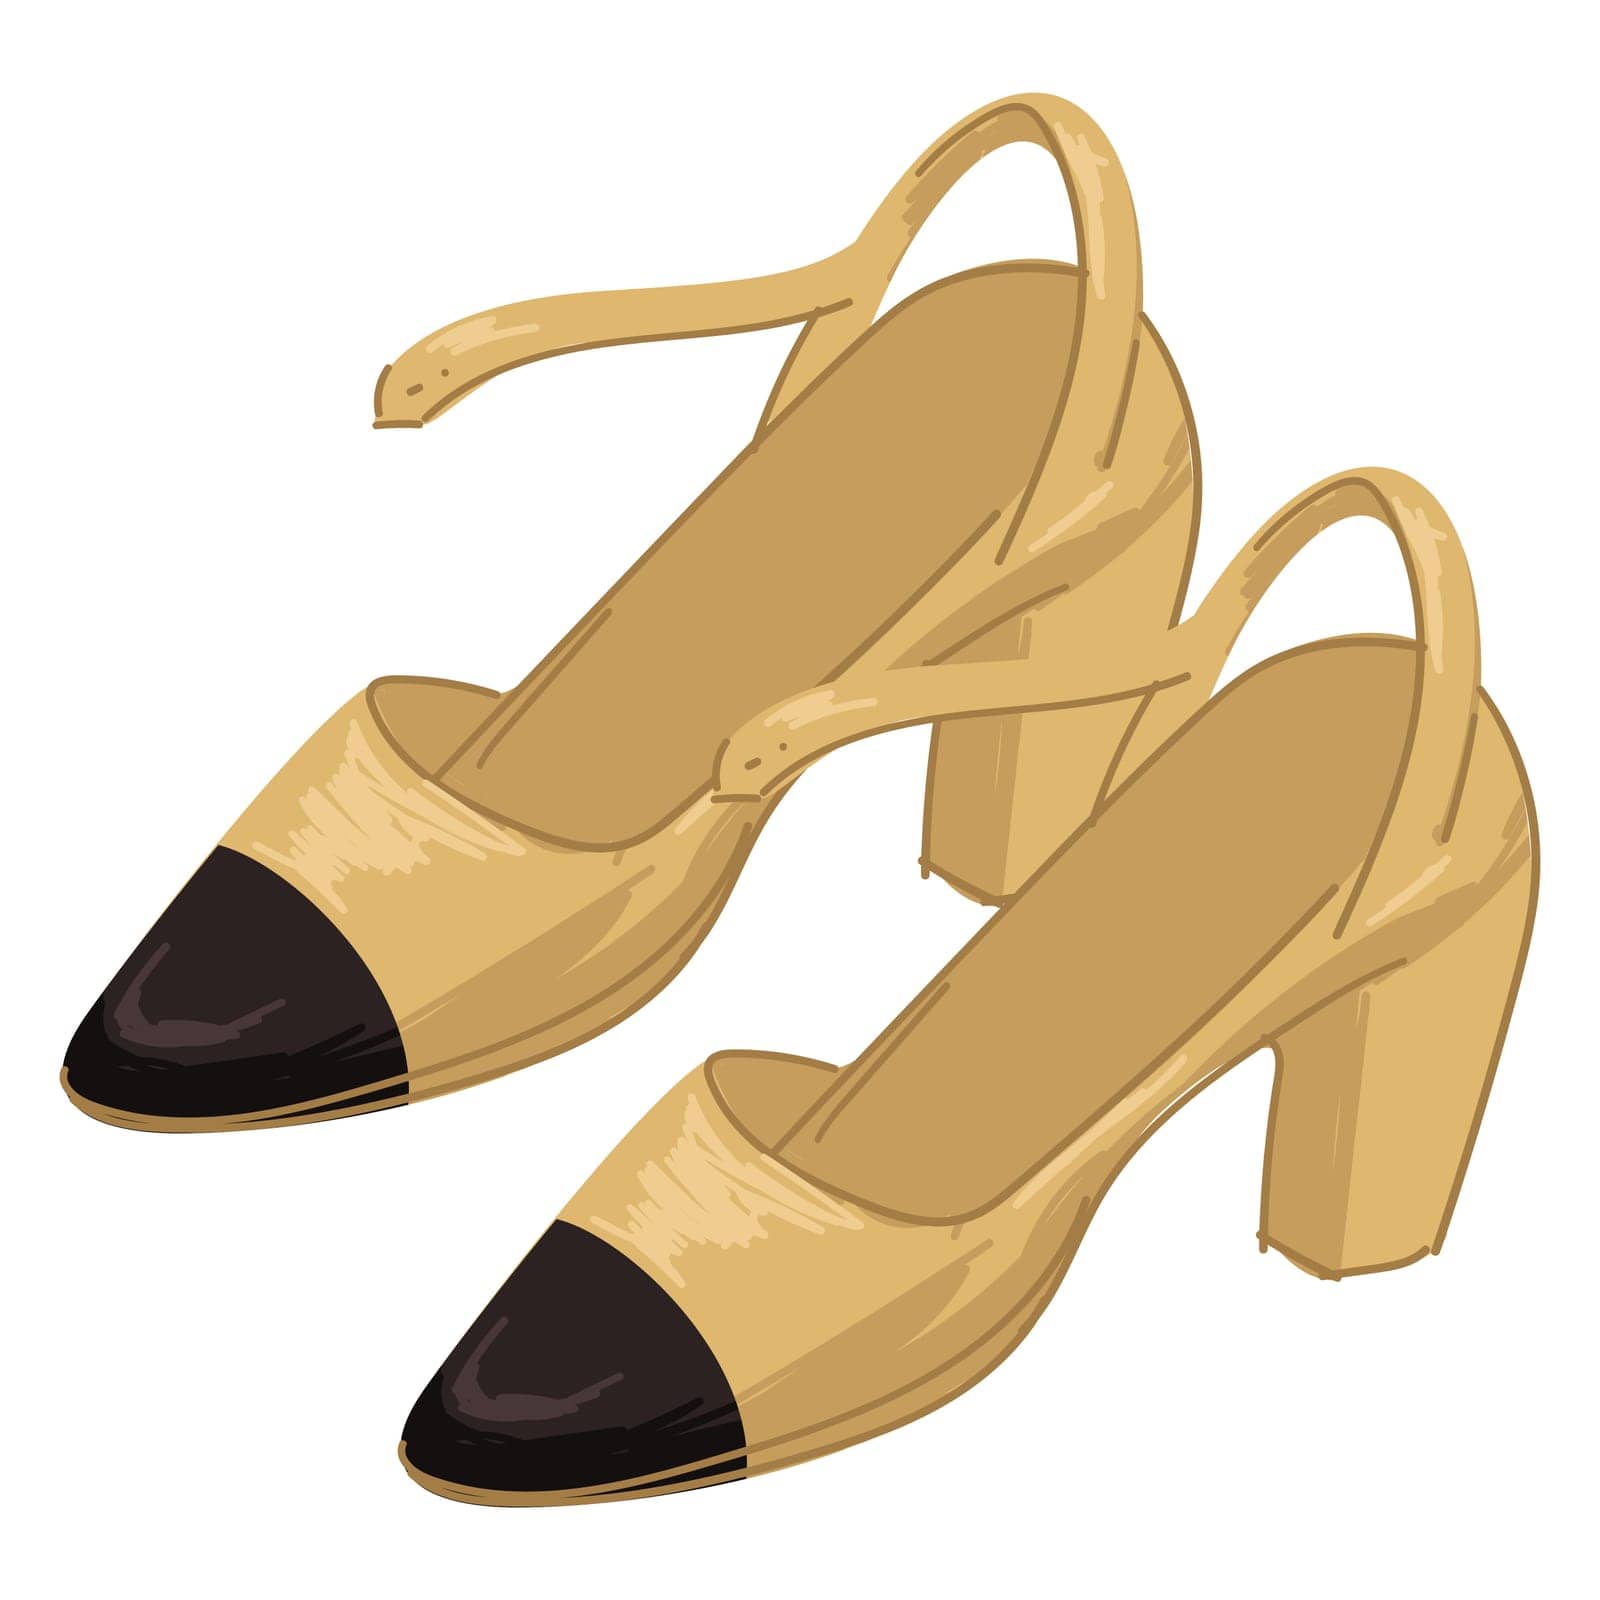 Classic shoes on heels for women fashion and style by Sonulkaster